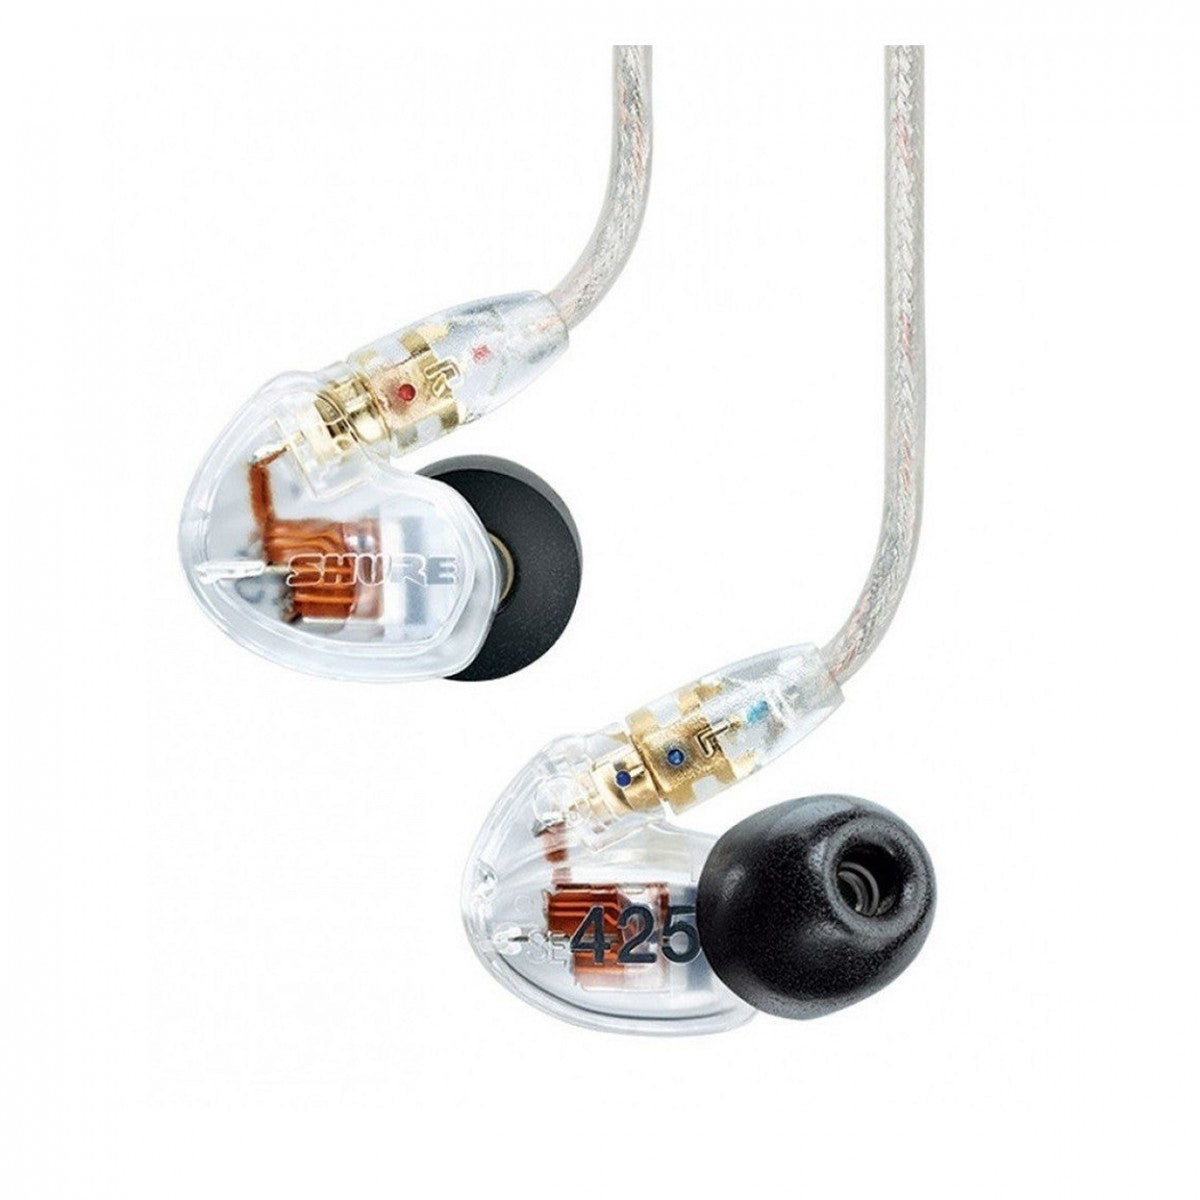 Shure SE425 Sound Isolating Earphones with True Wireless - Clear